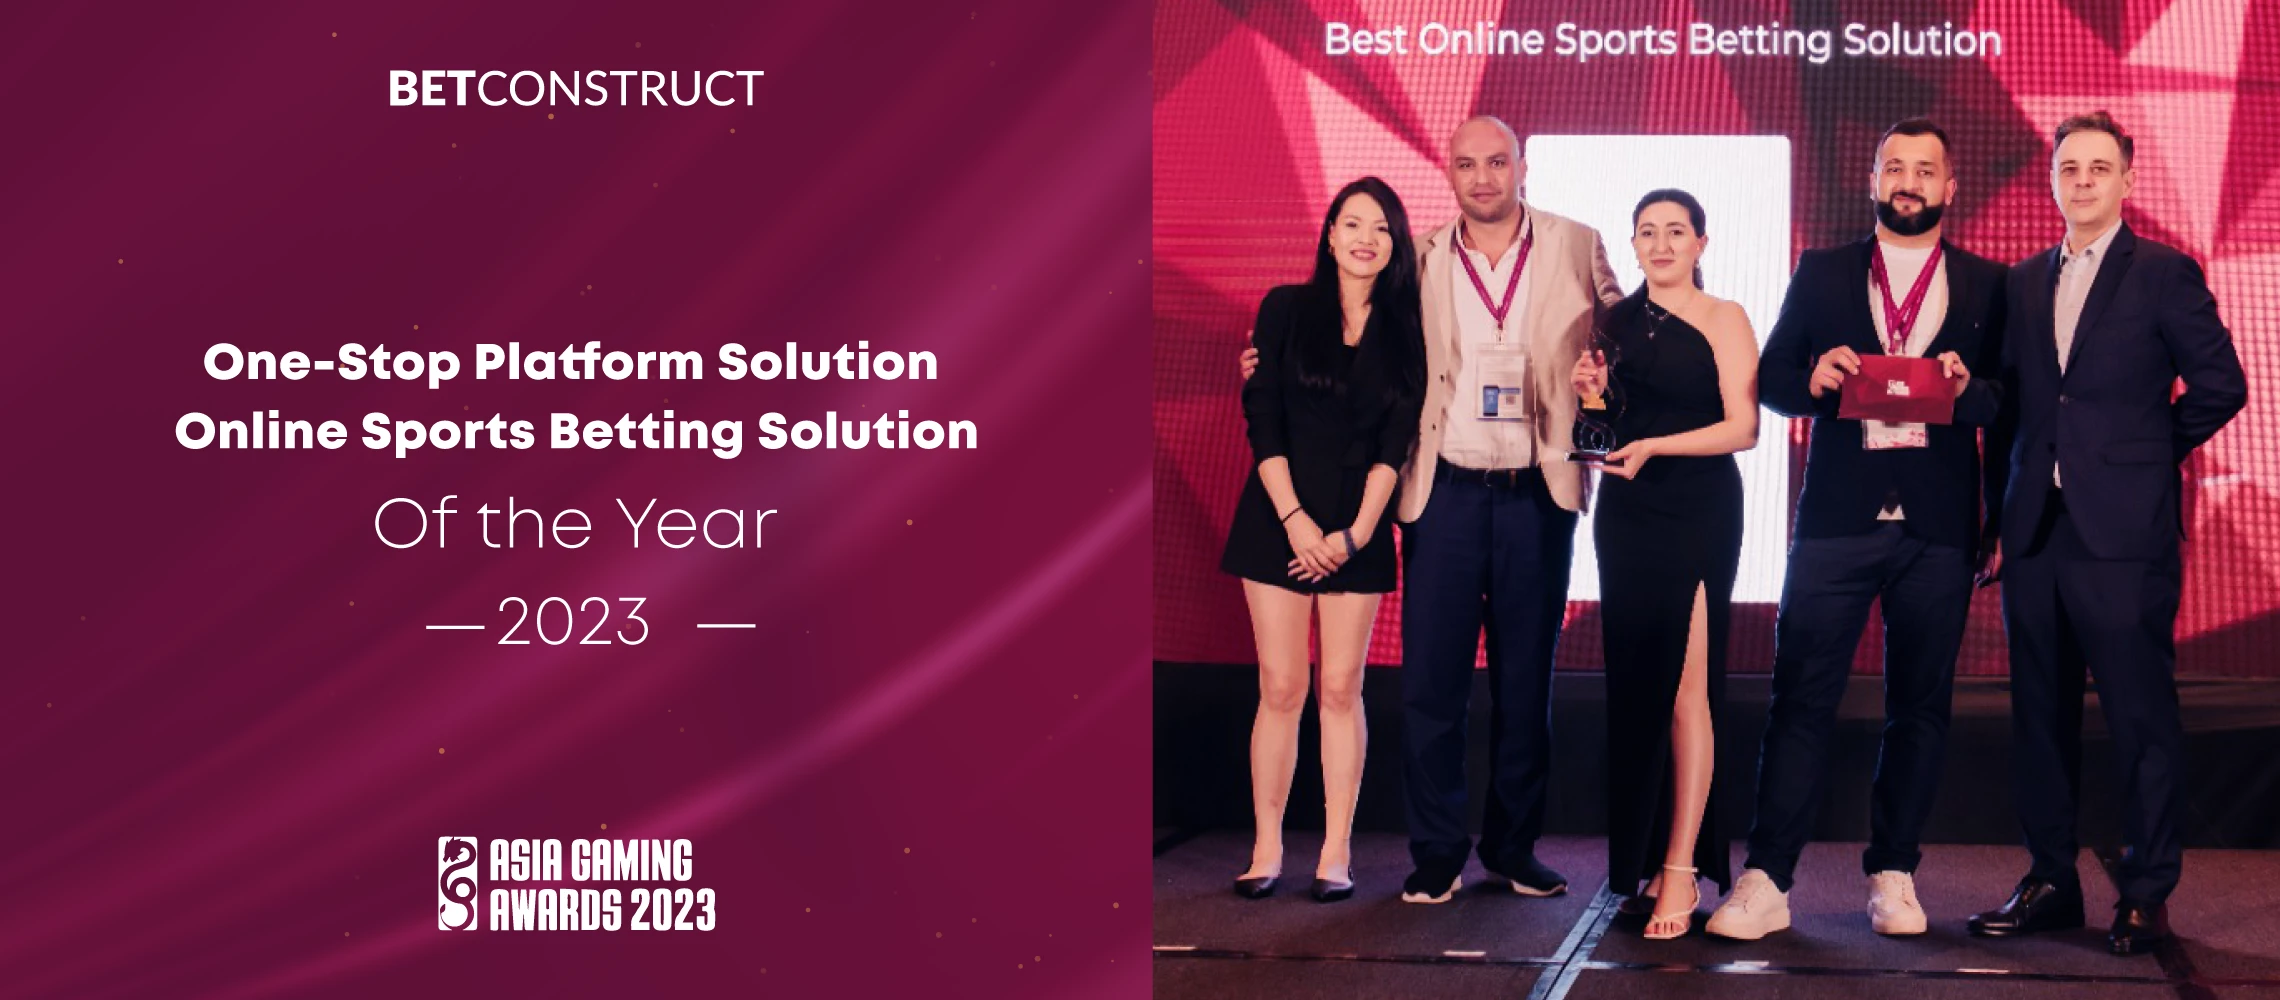 BetConstruct Wins One-Stop Platform Solution and Online Sports Betting Solution Awards at Asia Gaming Awards